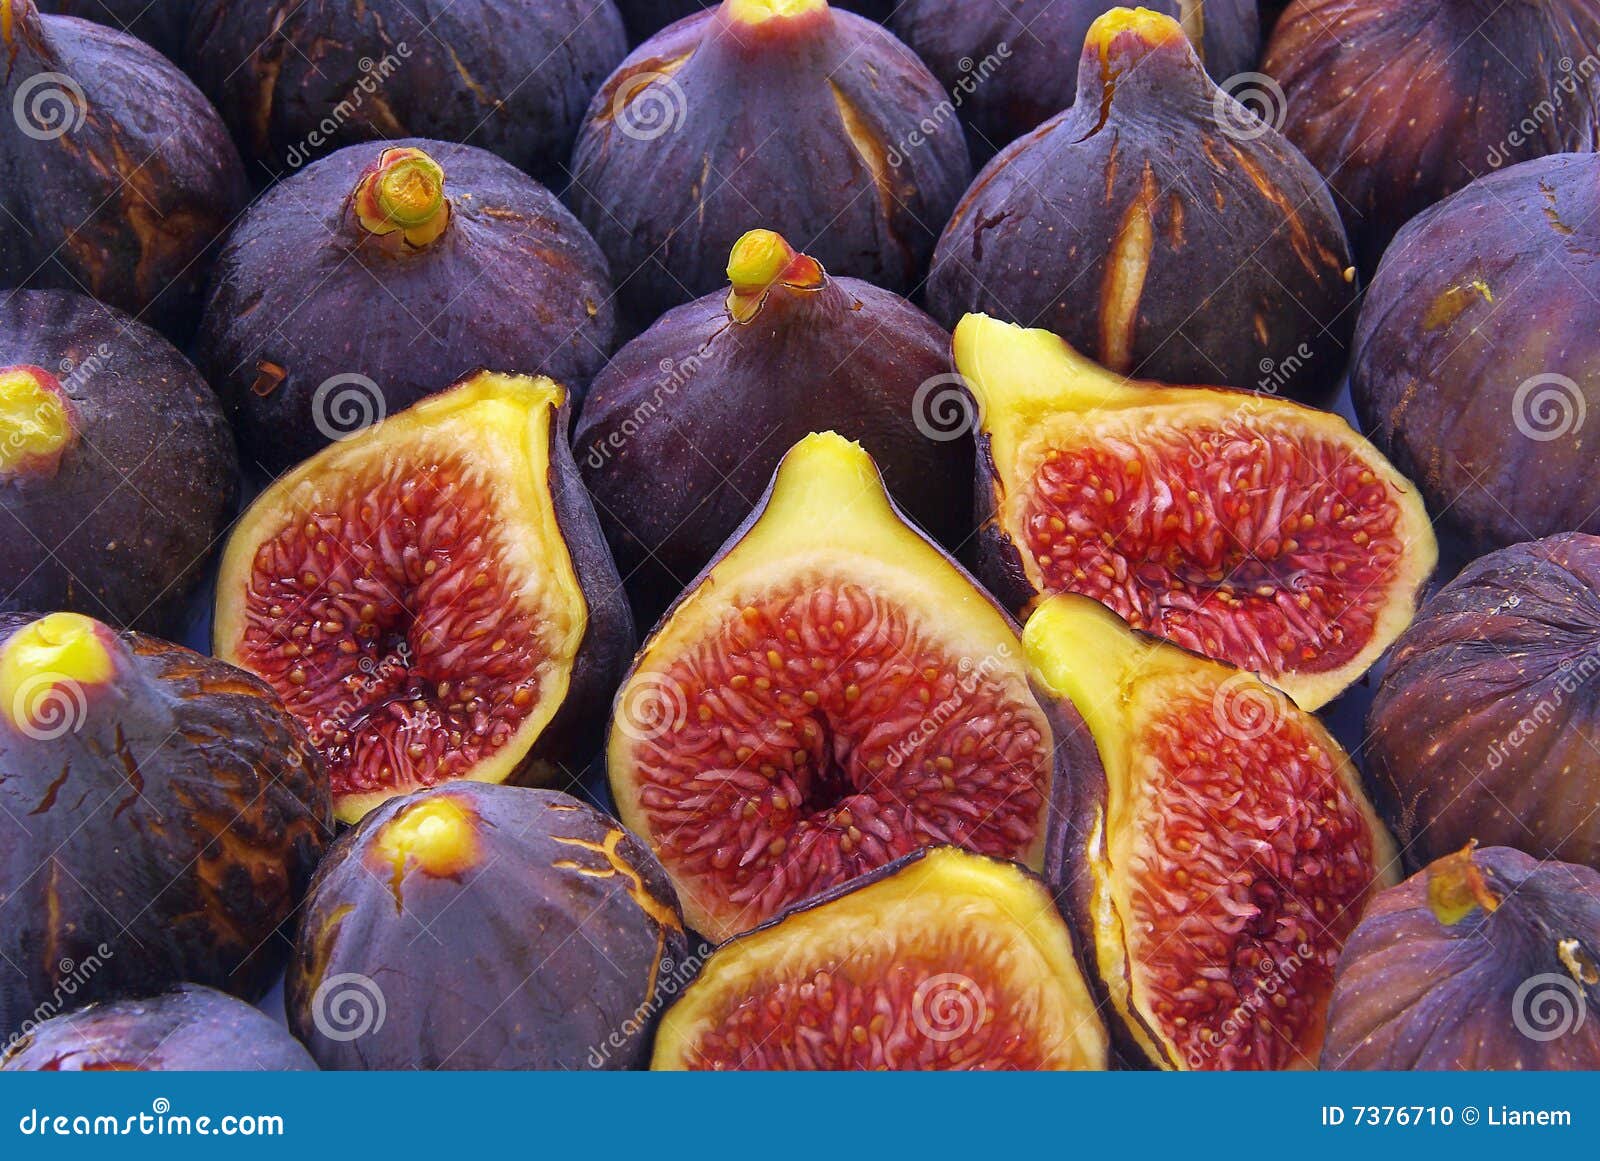 fig